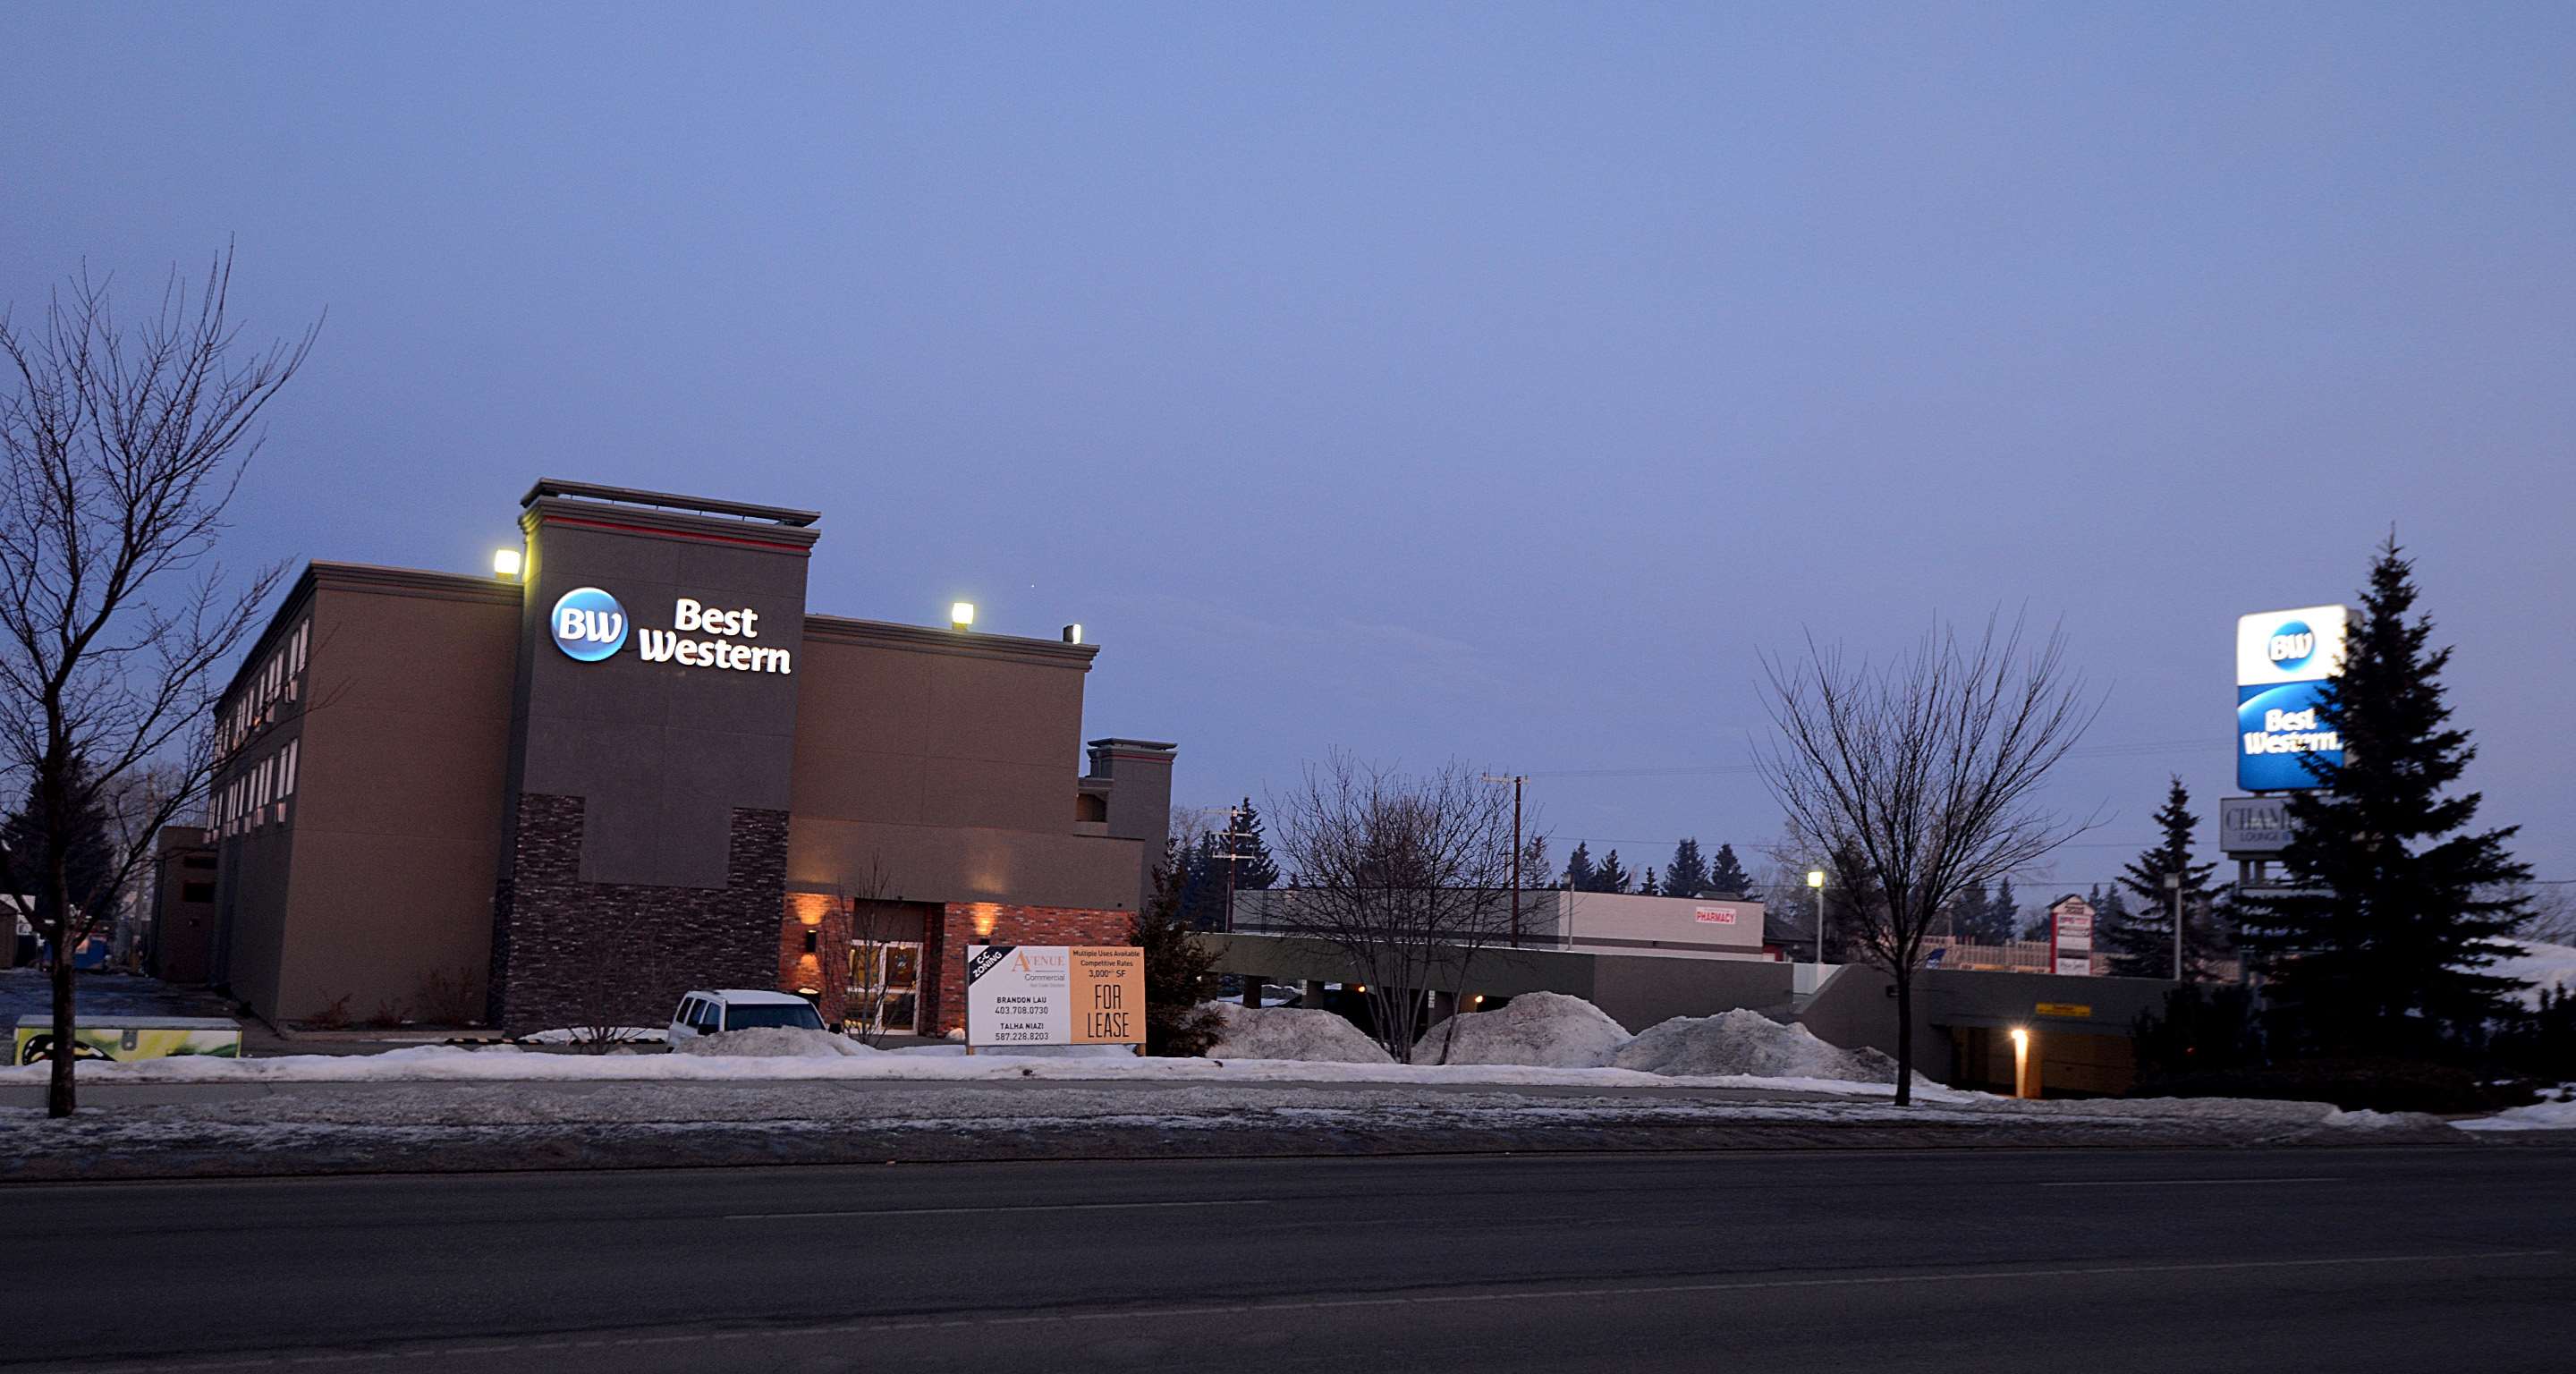 Best Western Airdrie in Airdrie: Best Western Airdrie is walking distance to over 15 restaurant options.